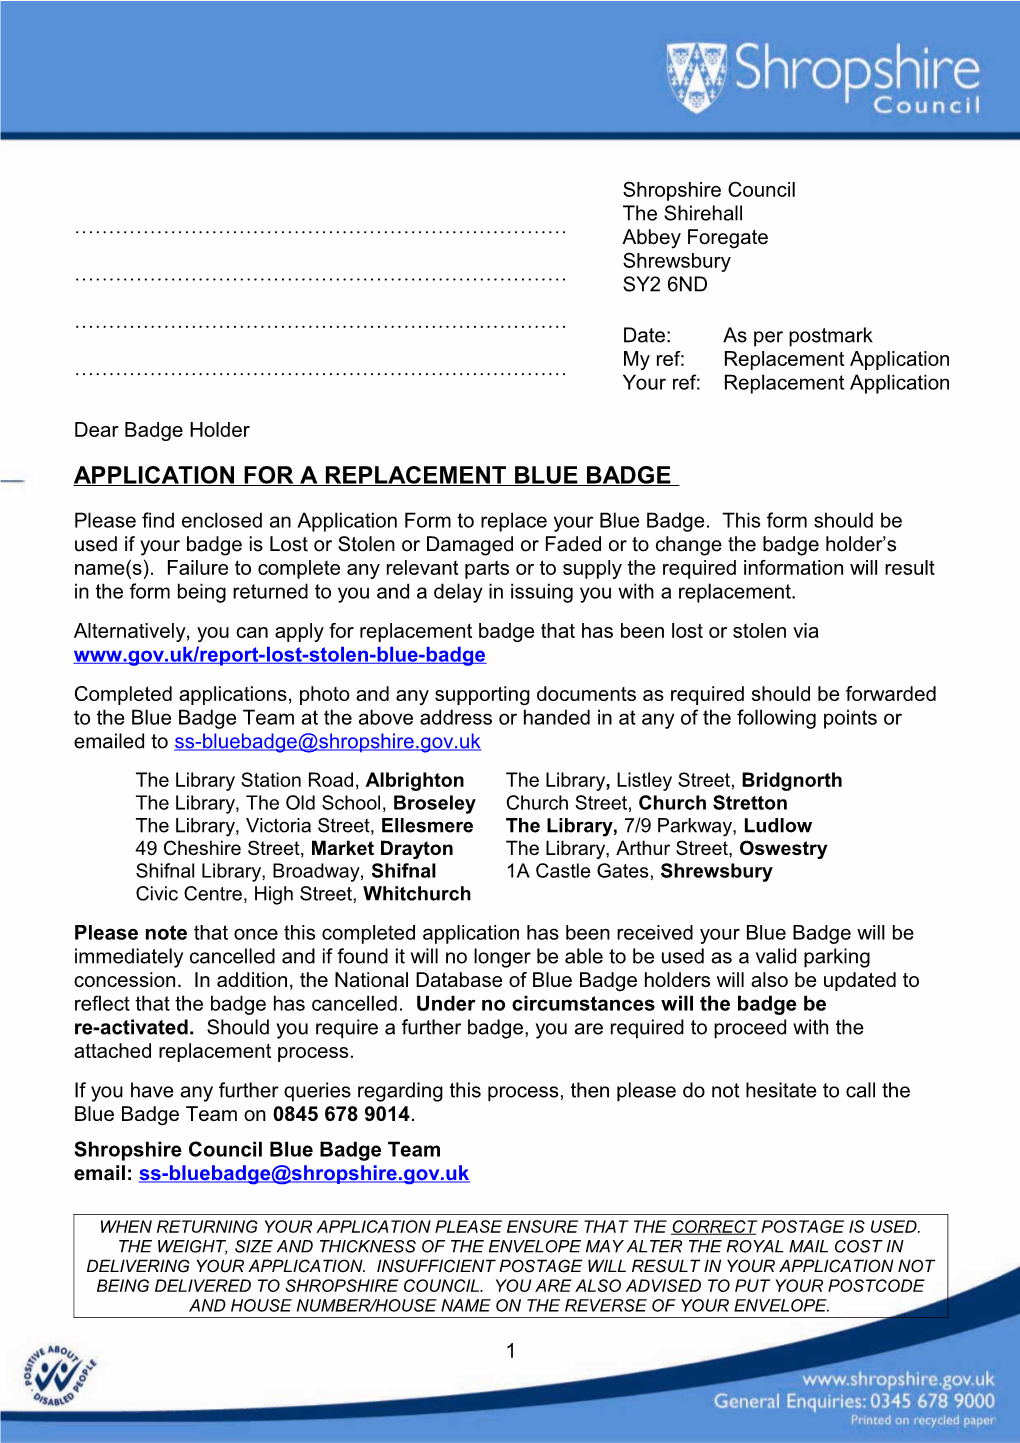 Application for a Replacement Blue Badge